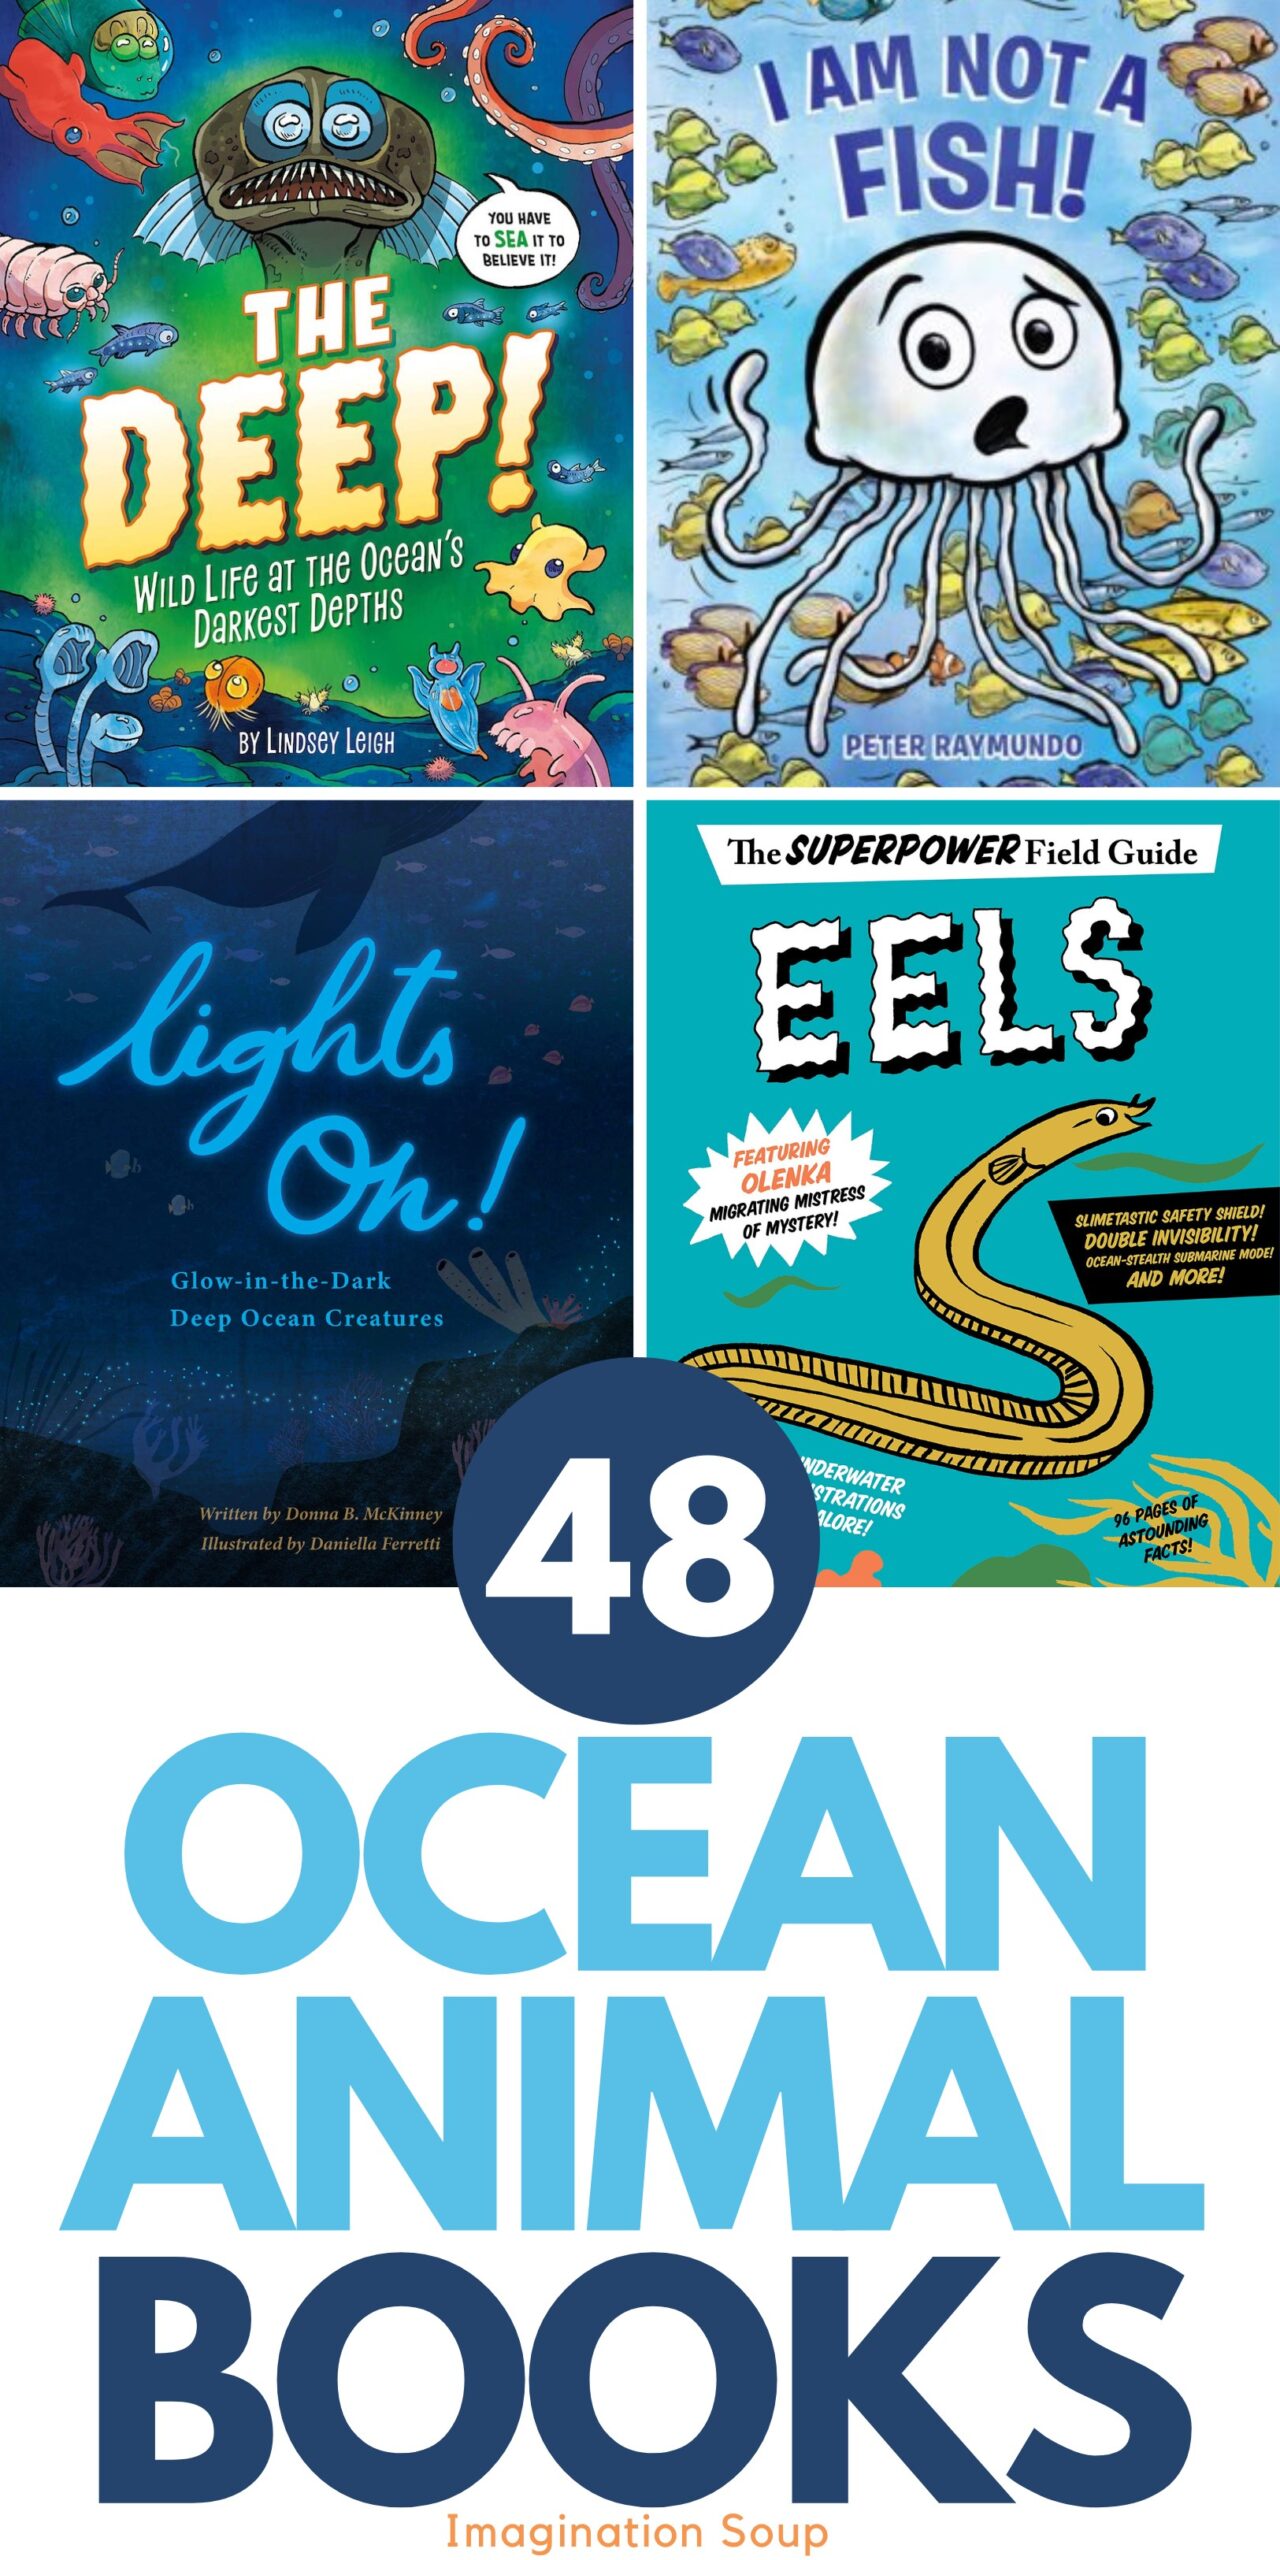 From scary to cute and ugly ocean animals, learn all about sea creatures in all parts of the ocean, including the deepest seas! What will be your favorite ocean animal? Read these children's books about the coolest animals in the ocean to find out!